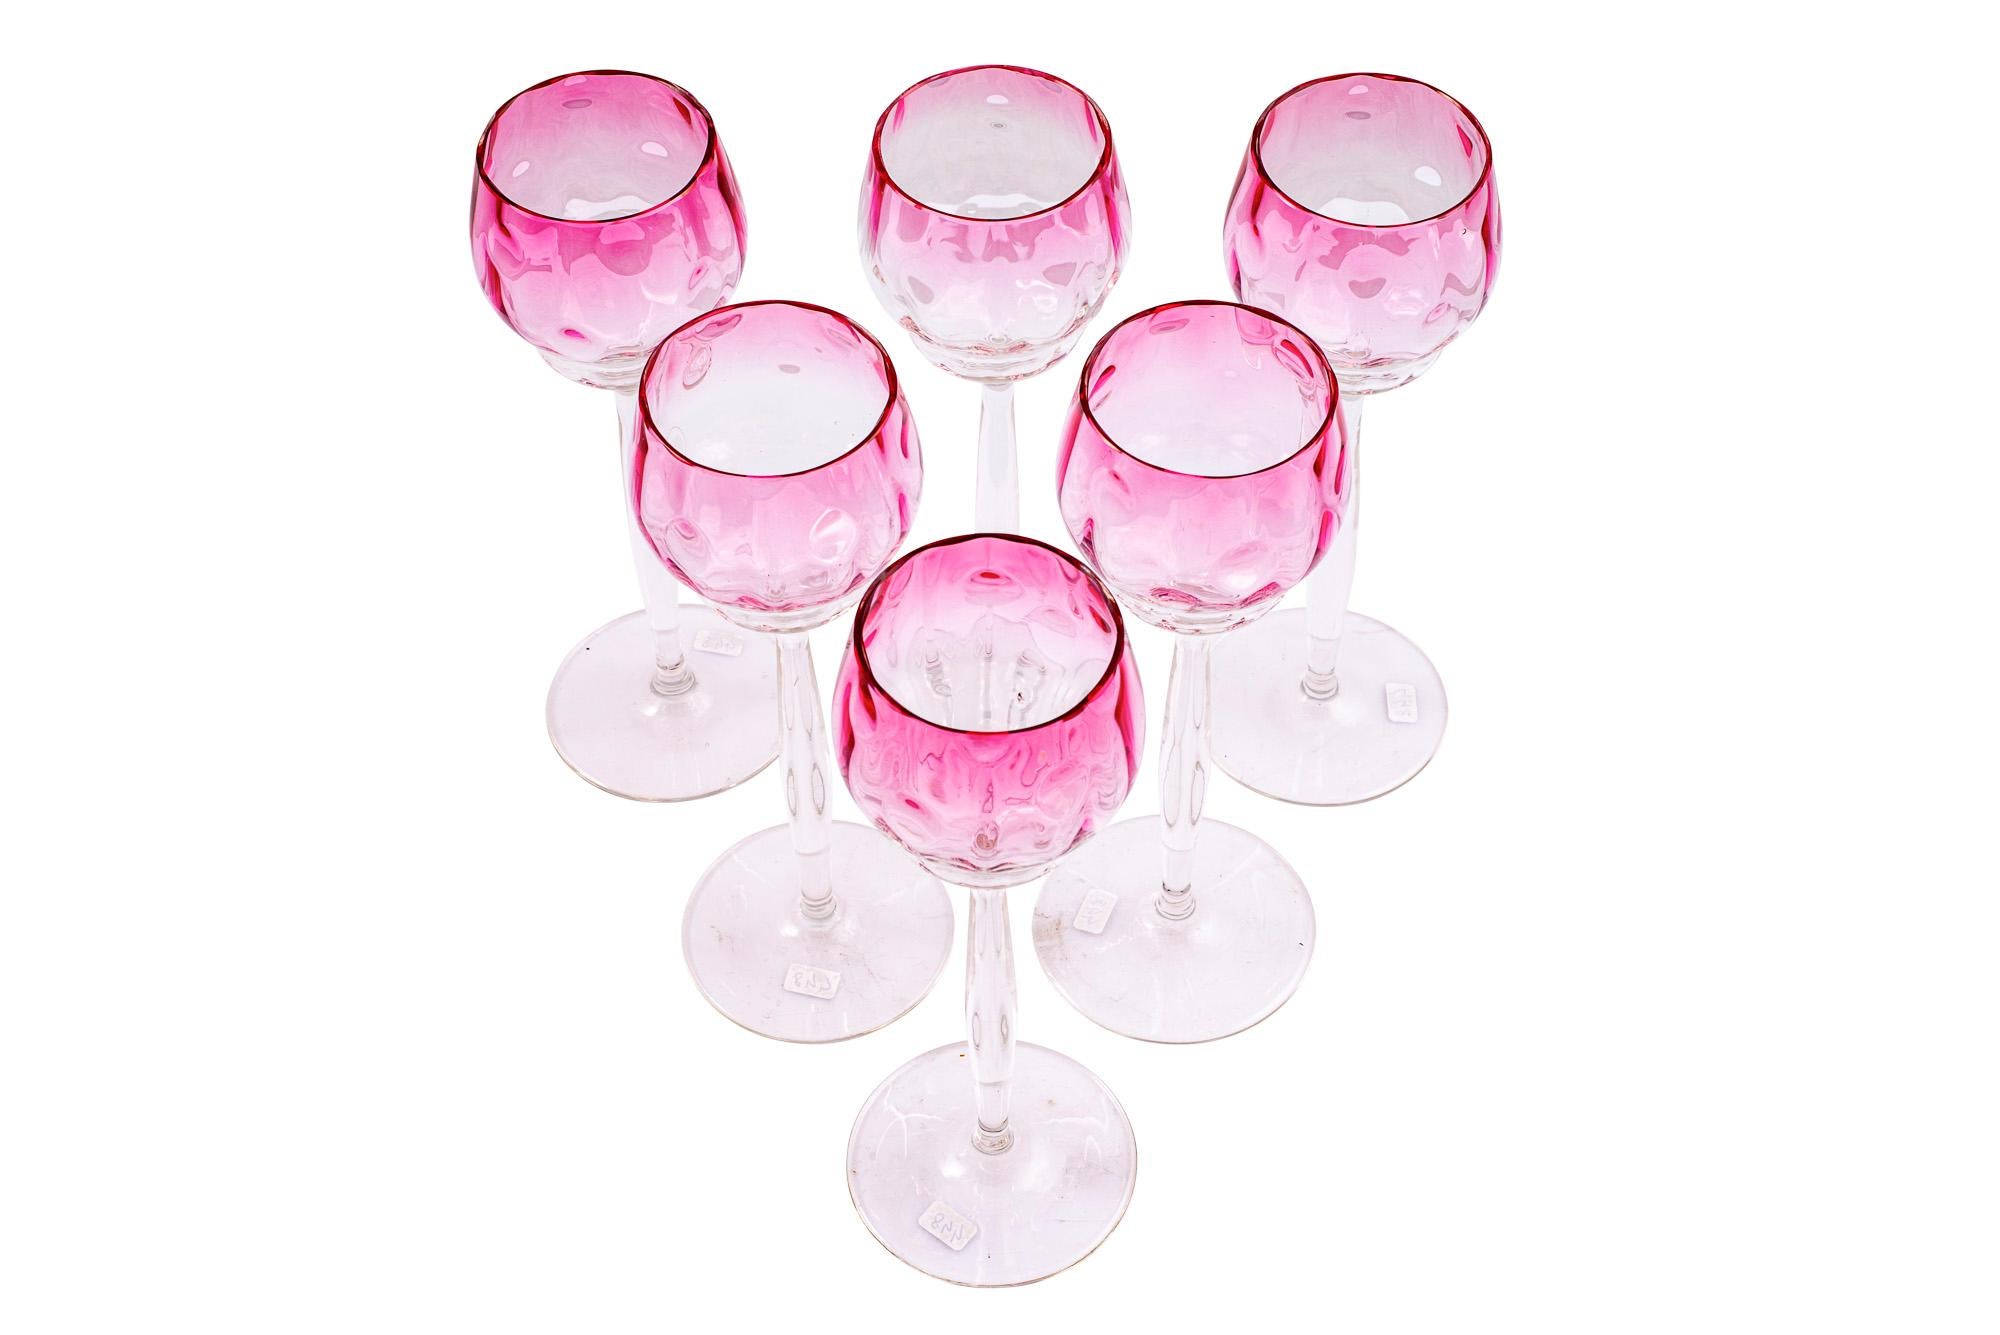 Set of 6 wine glasses Meteor decoration pink Koloman Moser Meyr's Neffe ca. 1901 Austrian Jugendstil

The “Meteor” decoration was used for entire sets as well as for individual glass objects. The glasses were produced by the Bohemian company